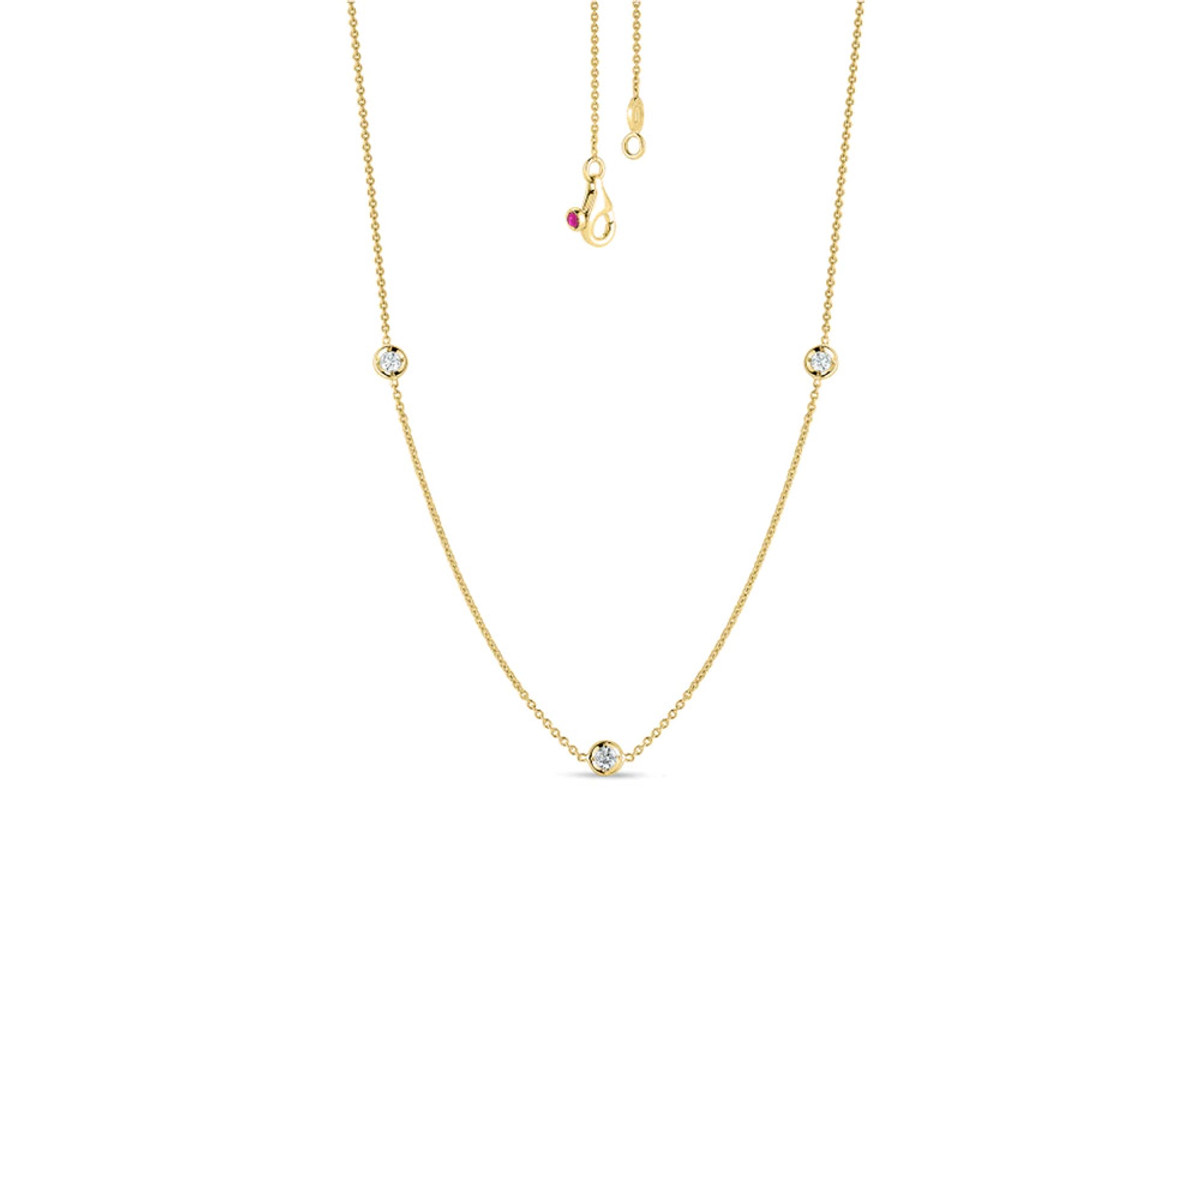 Roberto Coin Diamonds By Inch 18K Yellow Gold & Diamond 3 Station Necklace-DNKFY1067 Product Image